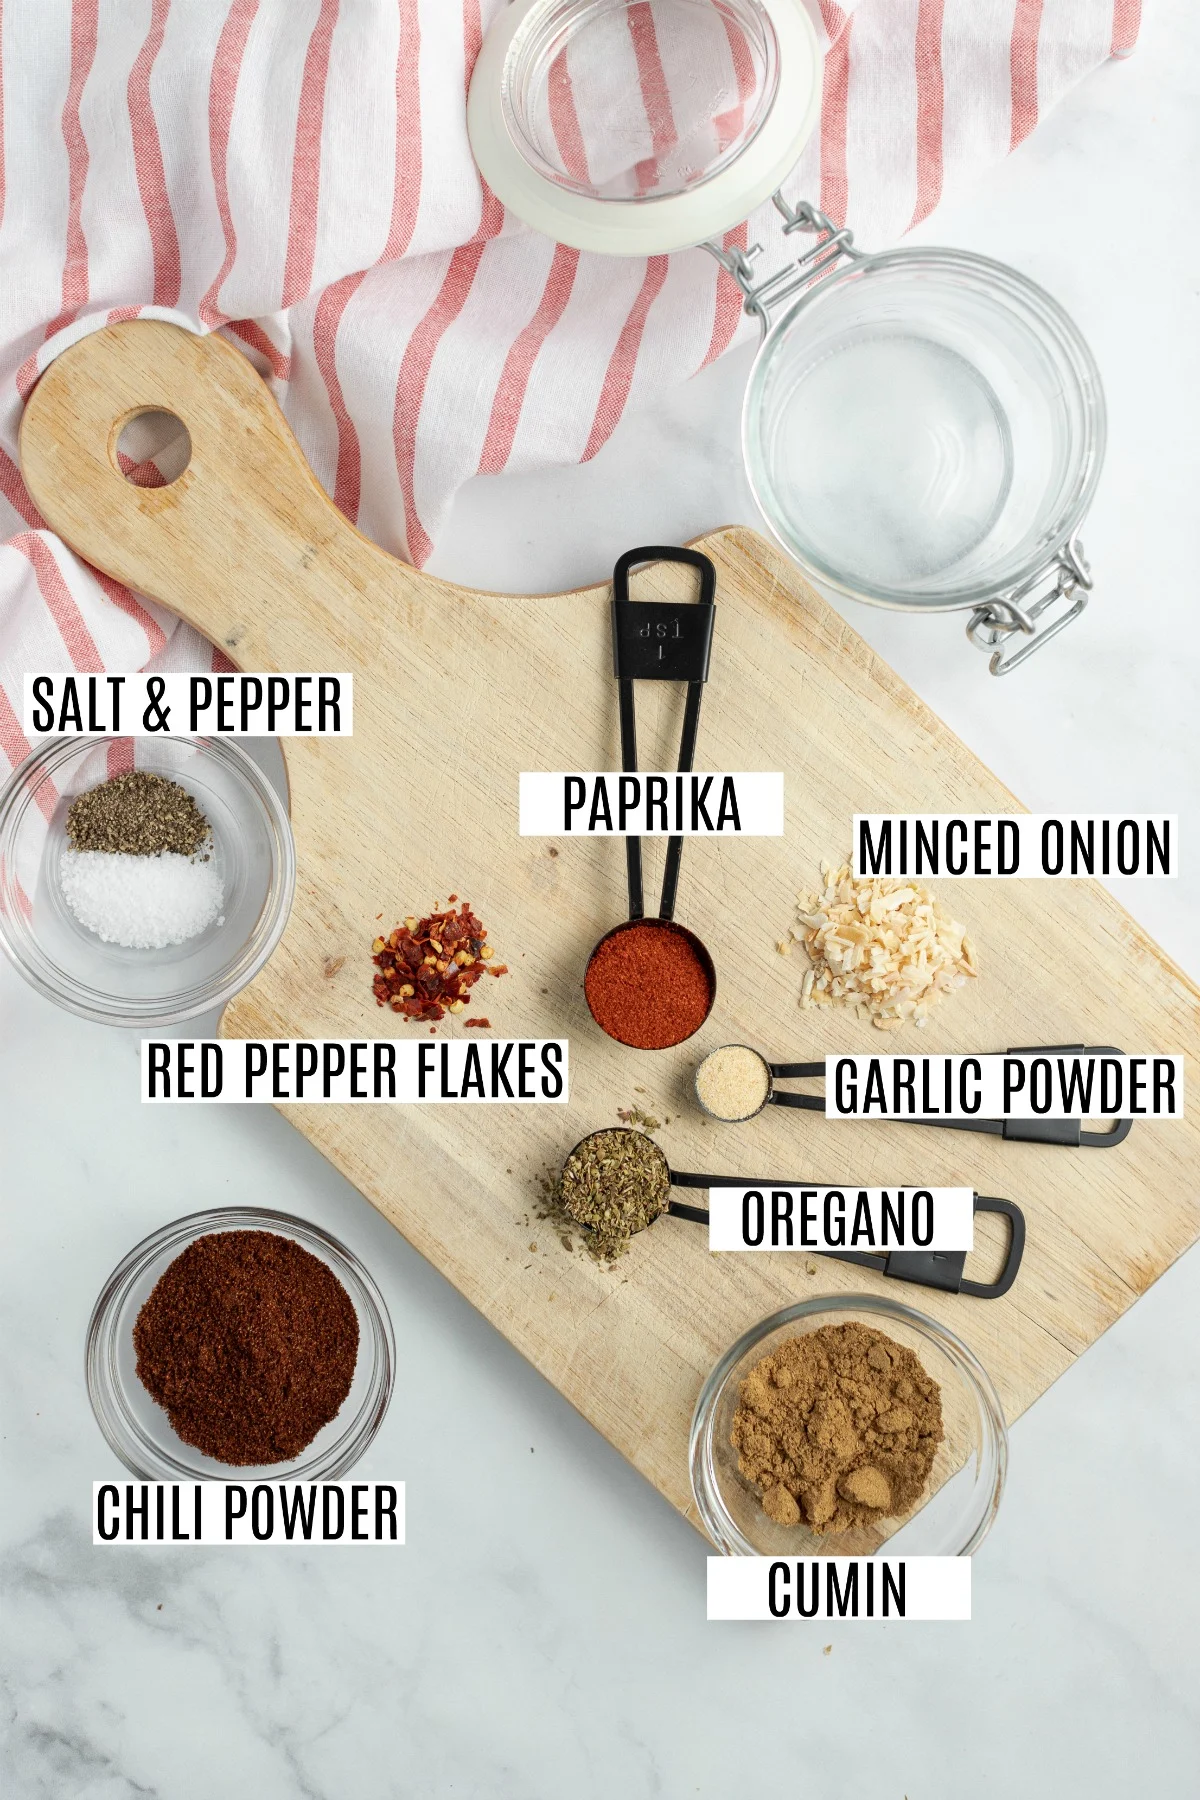 Ingredients needed for homemade taco seasoning mix.